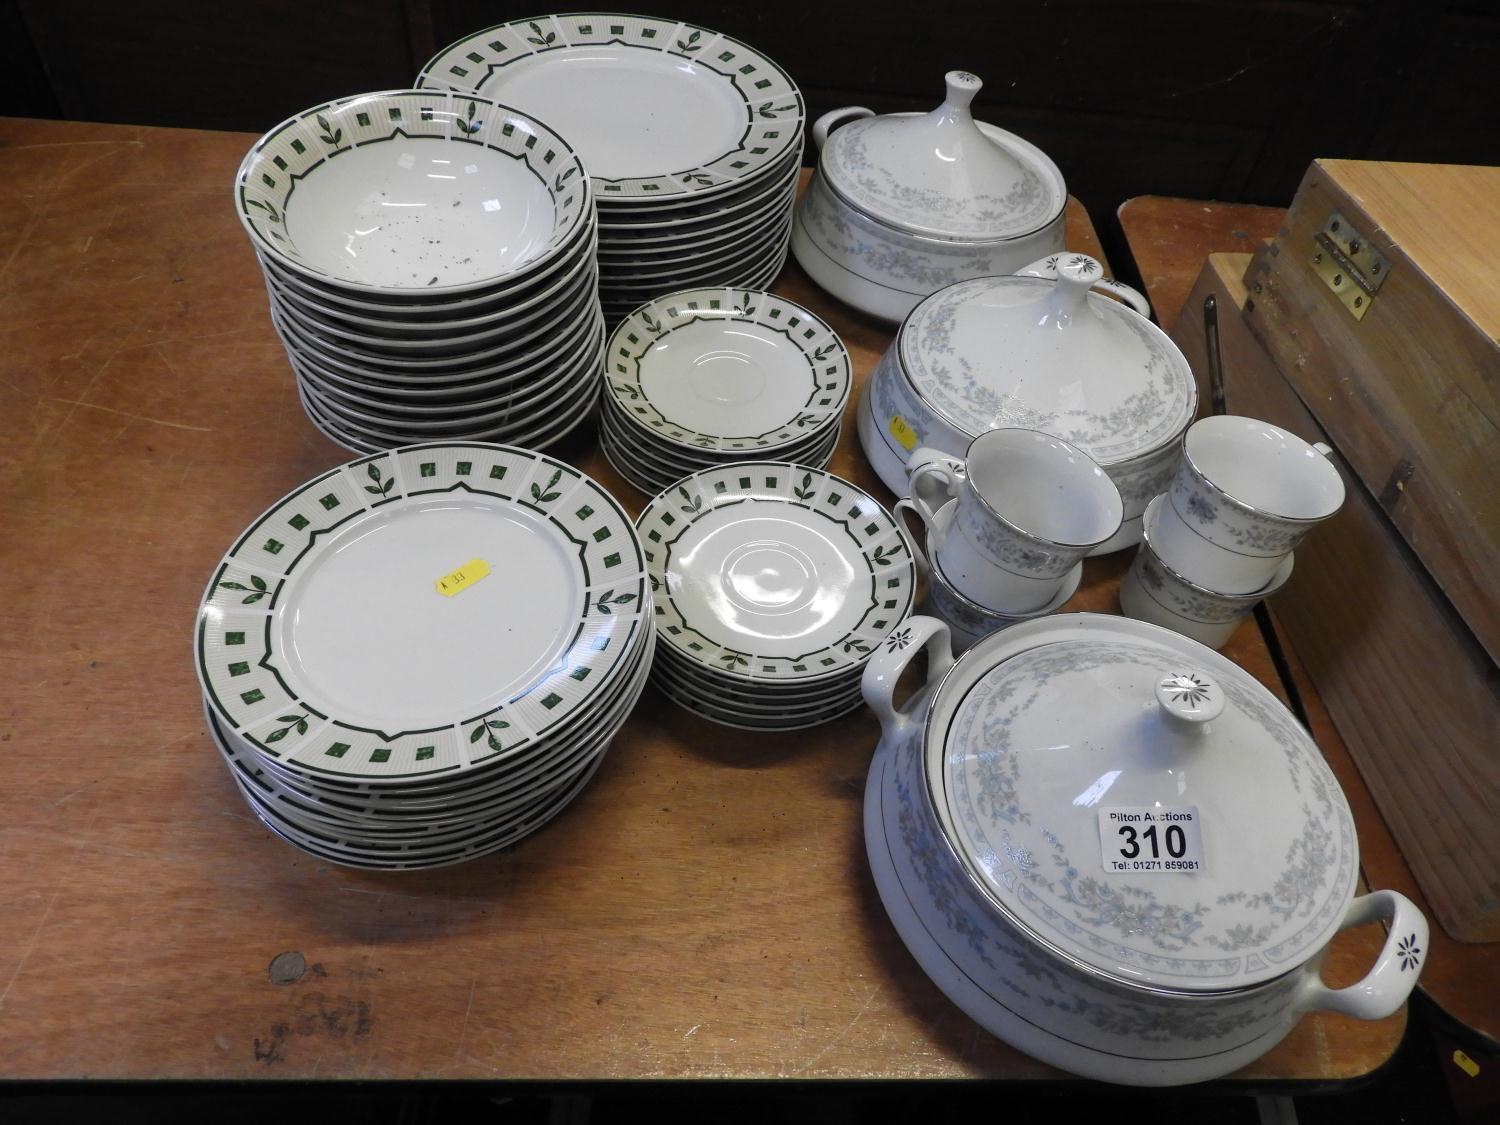 Large Quantity of Plates, Bowls, Saucers and Serving Dishes